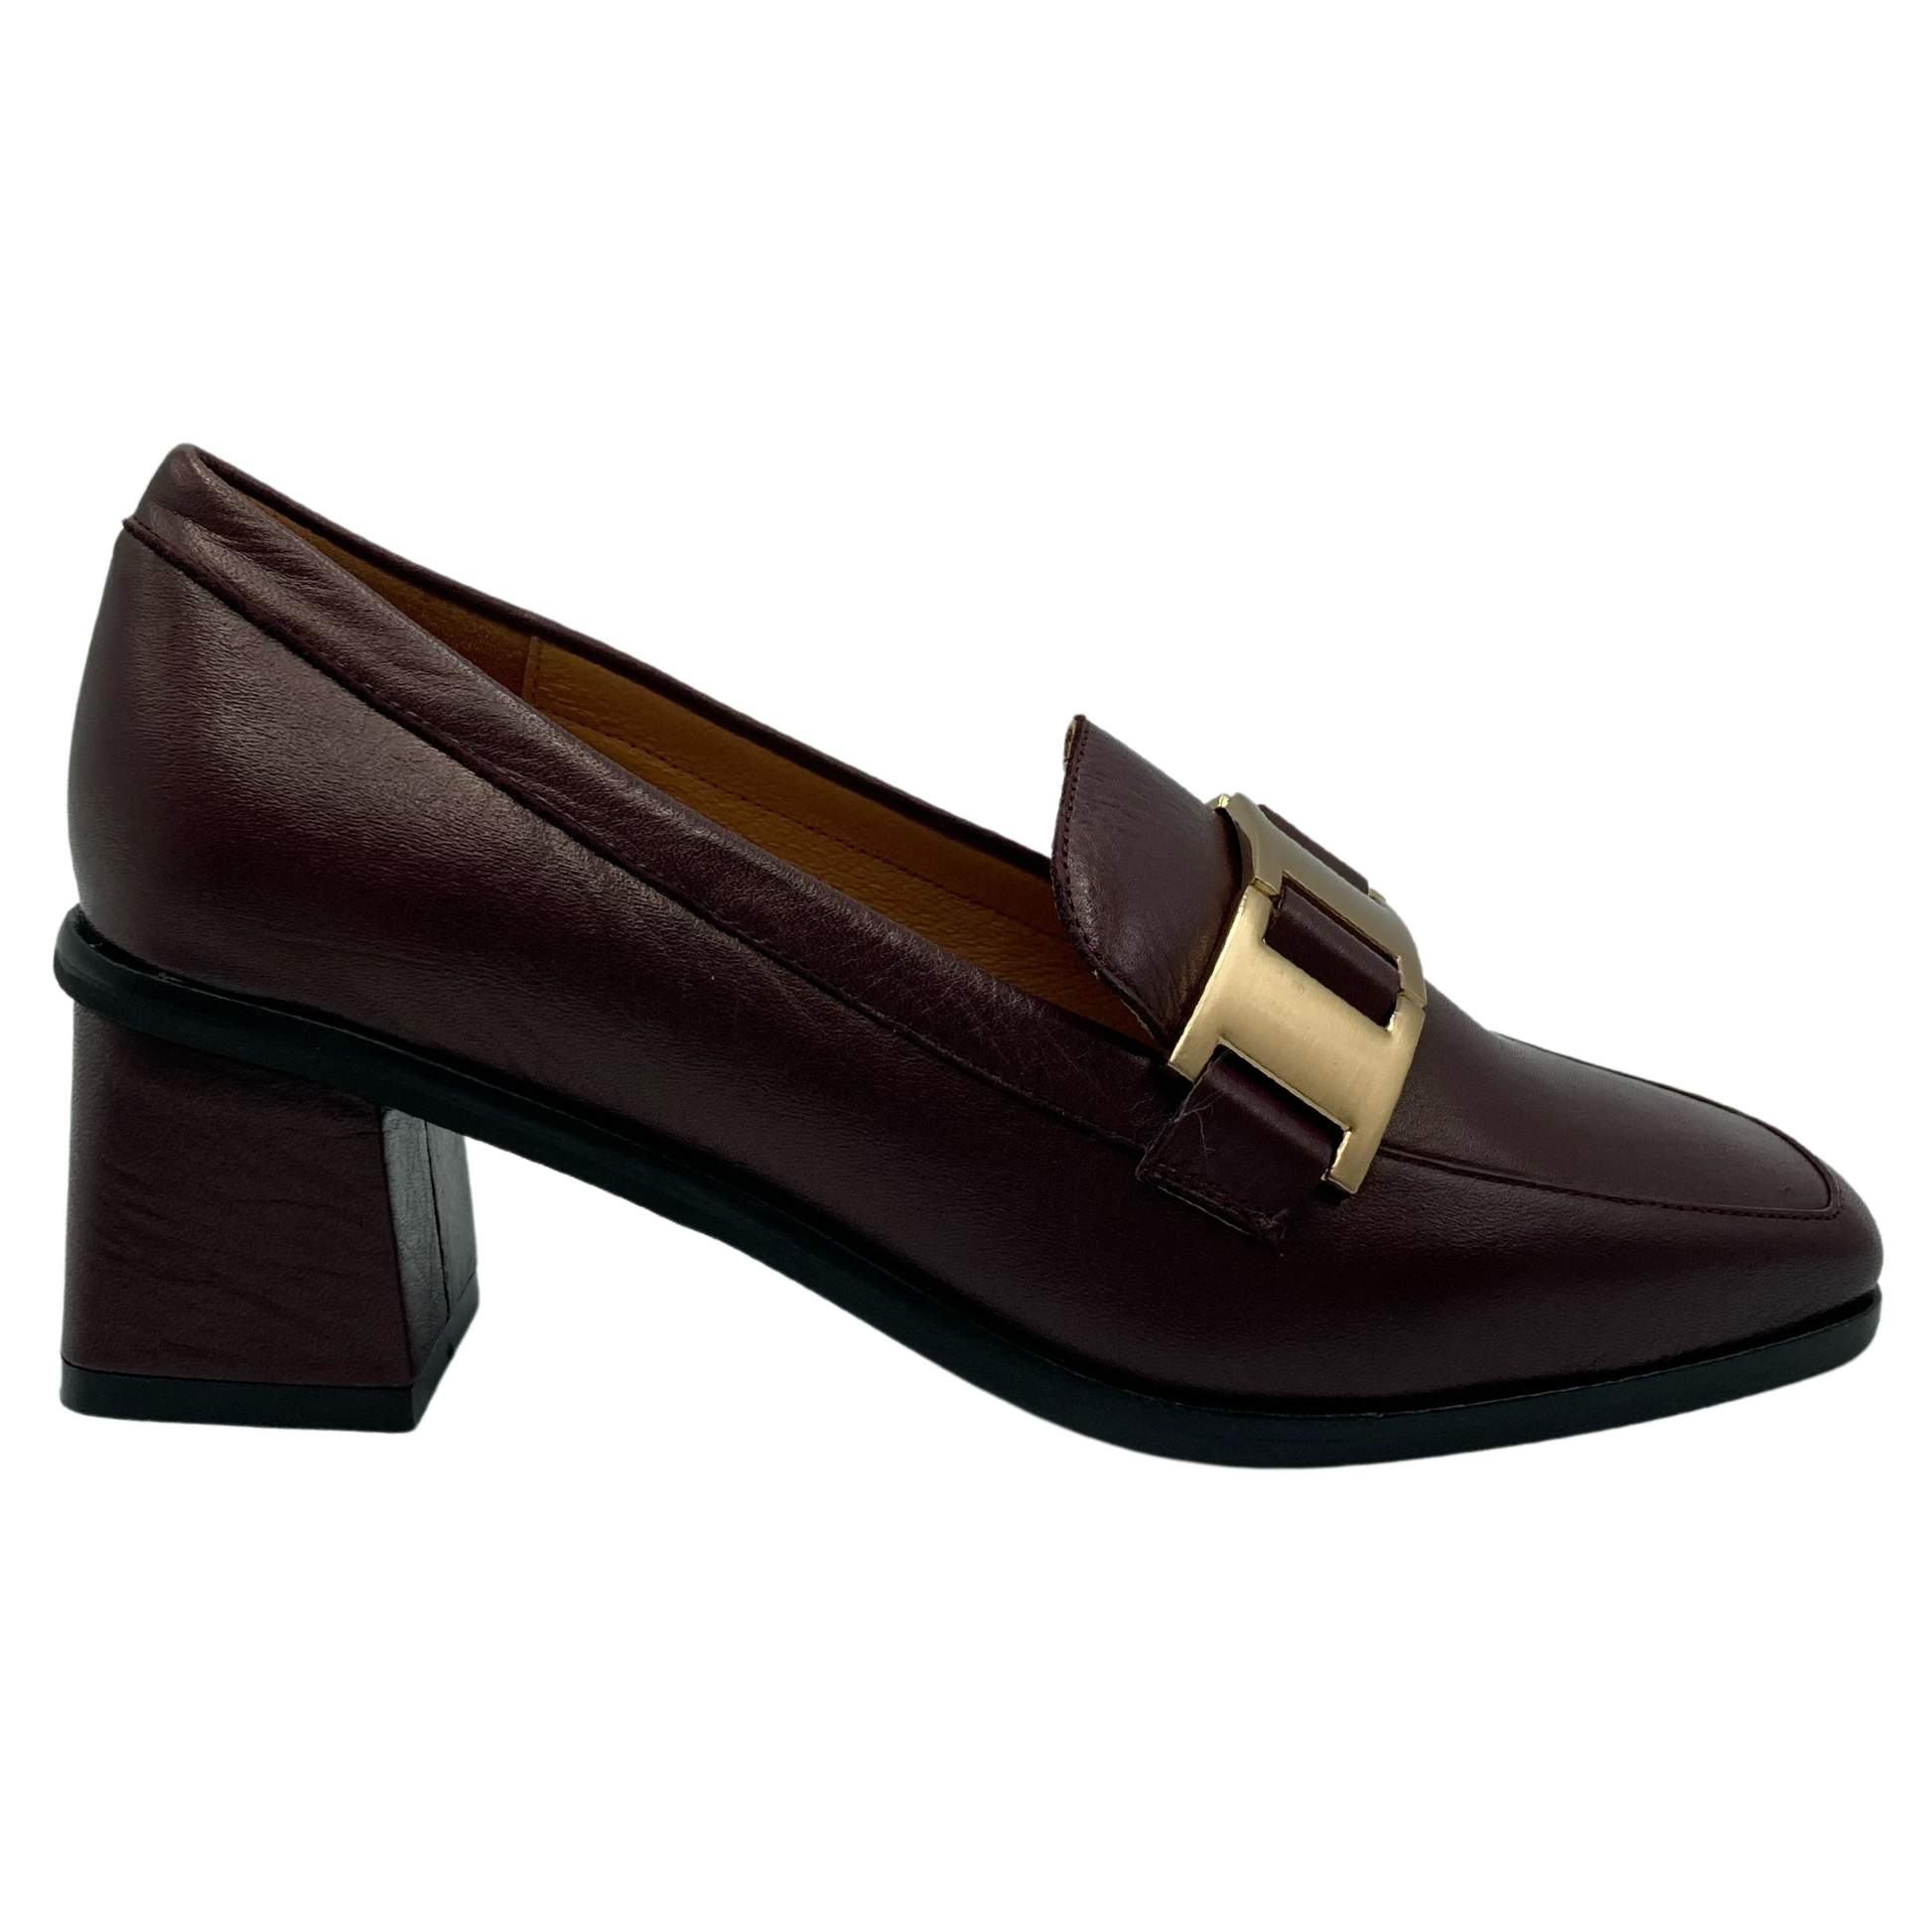 Right facing view of wine coloured loafer with gold buckle detail on upper and block leather covered heel